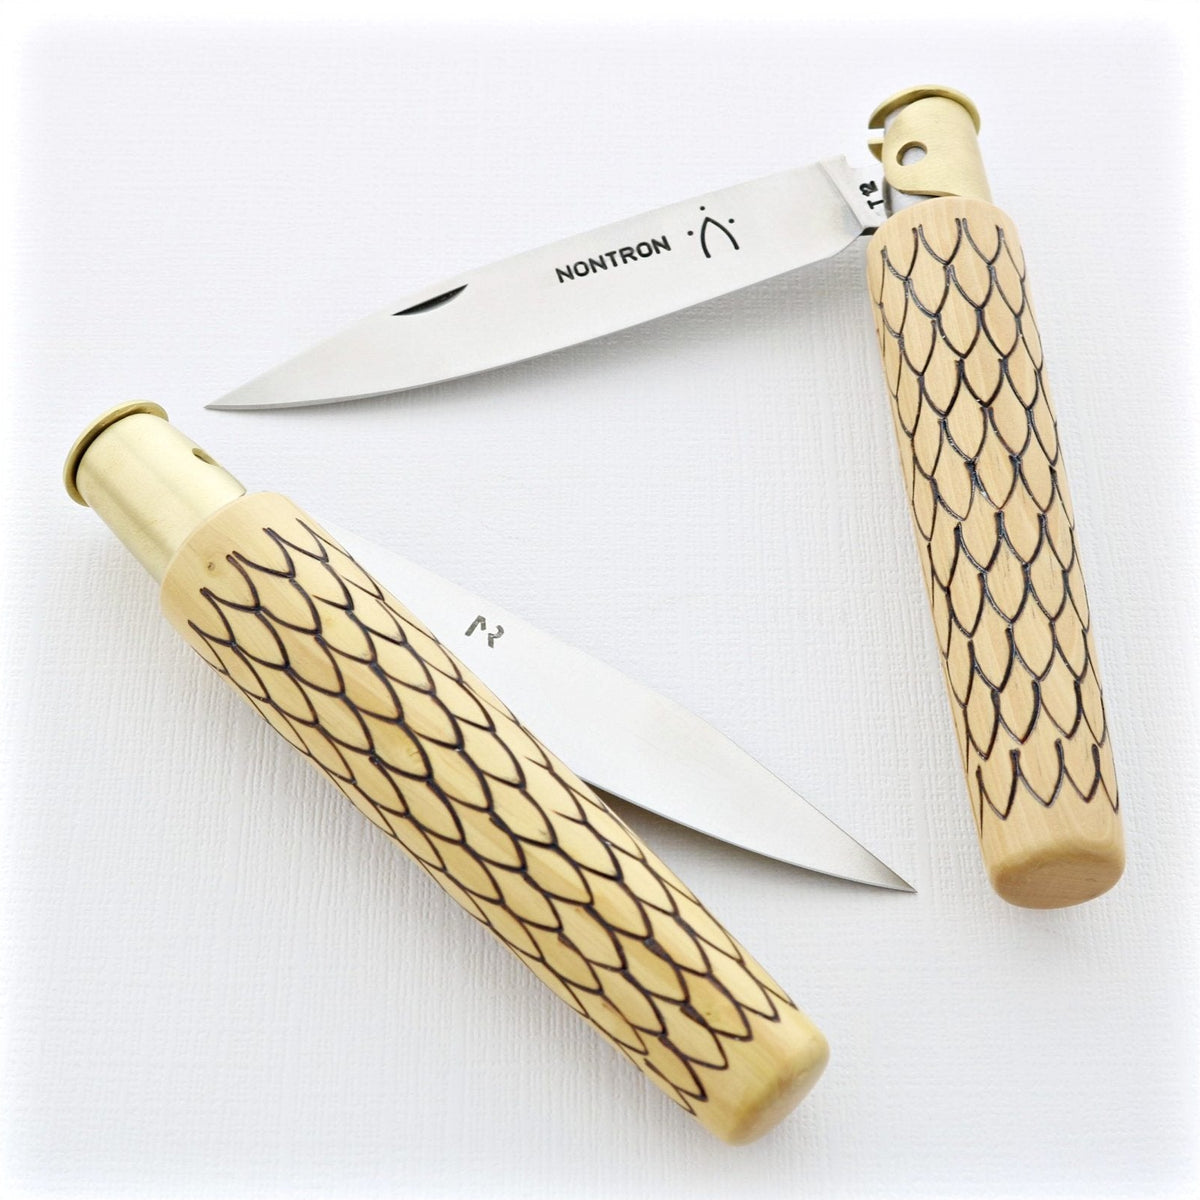 Nontron Pocket Knife No25 - Feathered Grand Duc